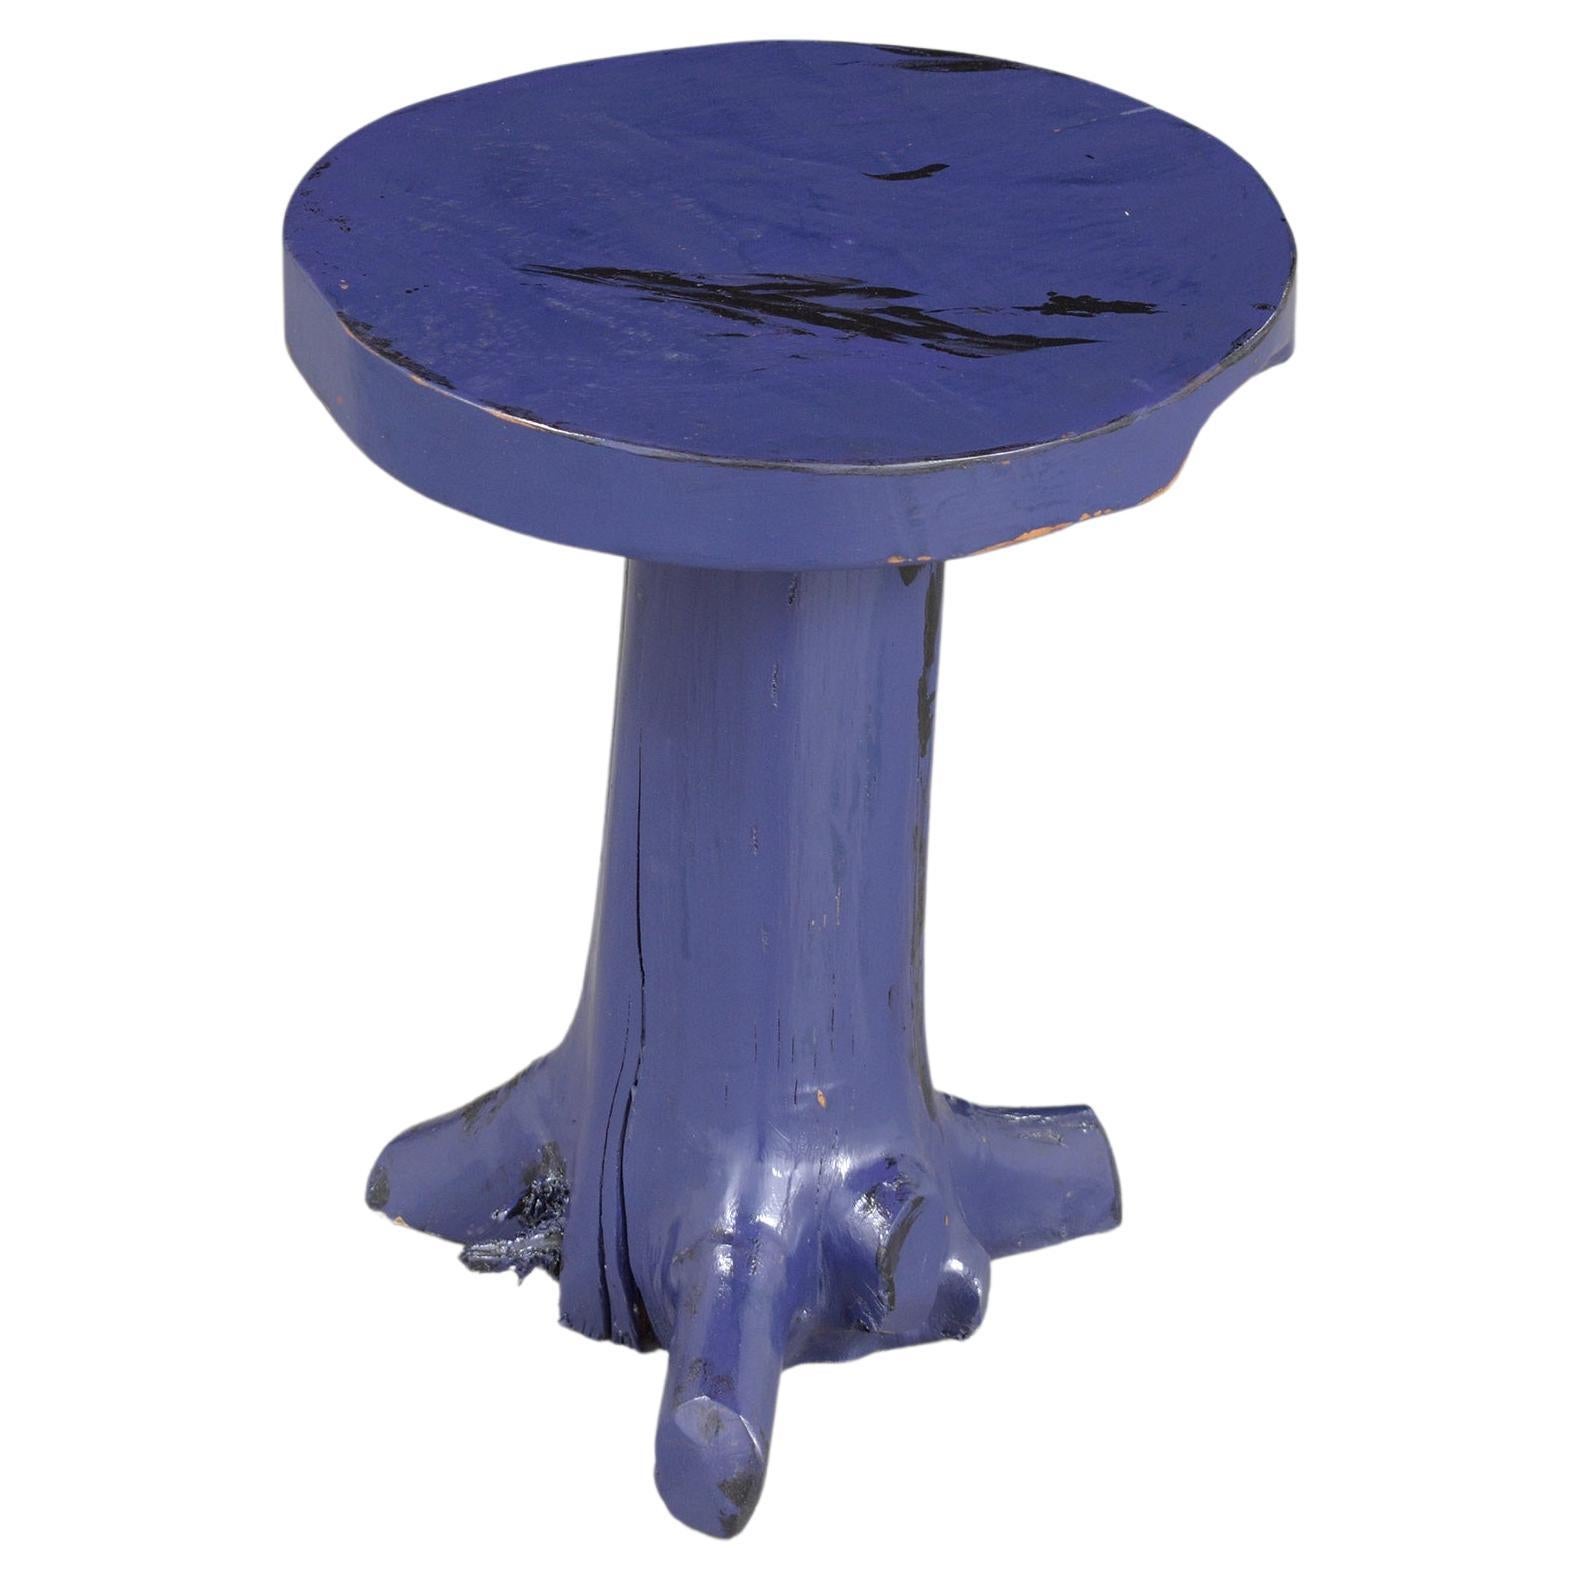 1960s Organic Modern Wood Root Side Table in Purple-Black Lacquer Finish For Sale